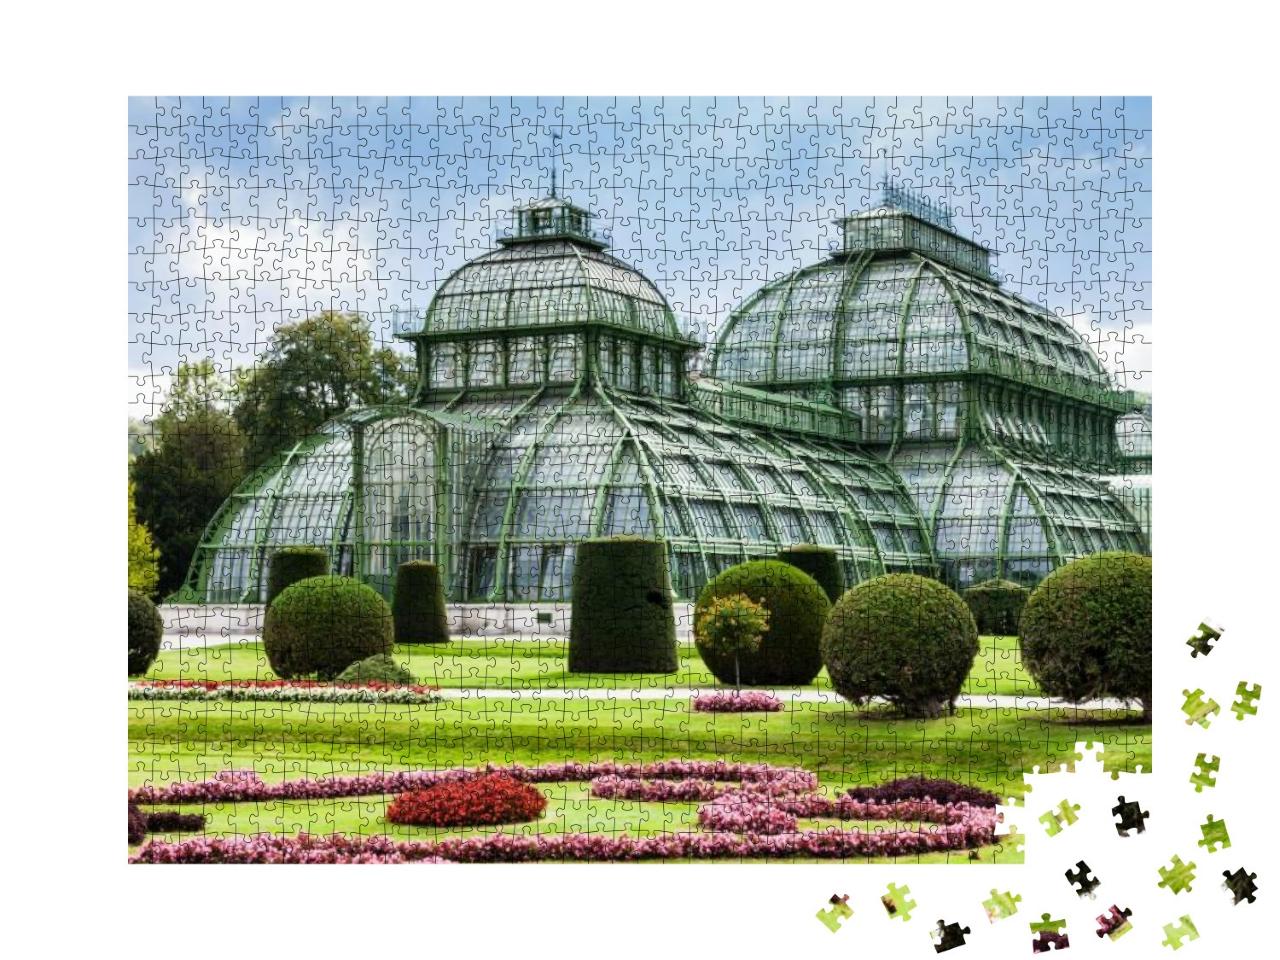 Travel to Vienna City - Palm House, Large Greenhouse in G... Jigsaw Puzzle with 1000 pieces